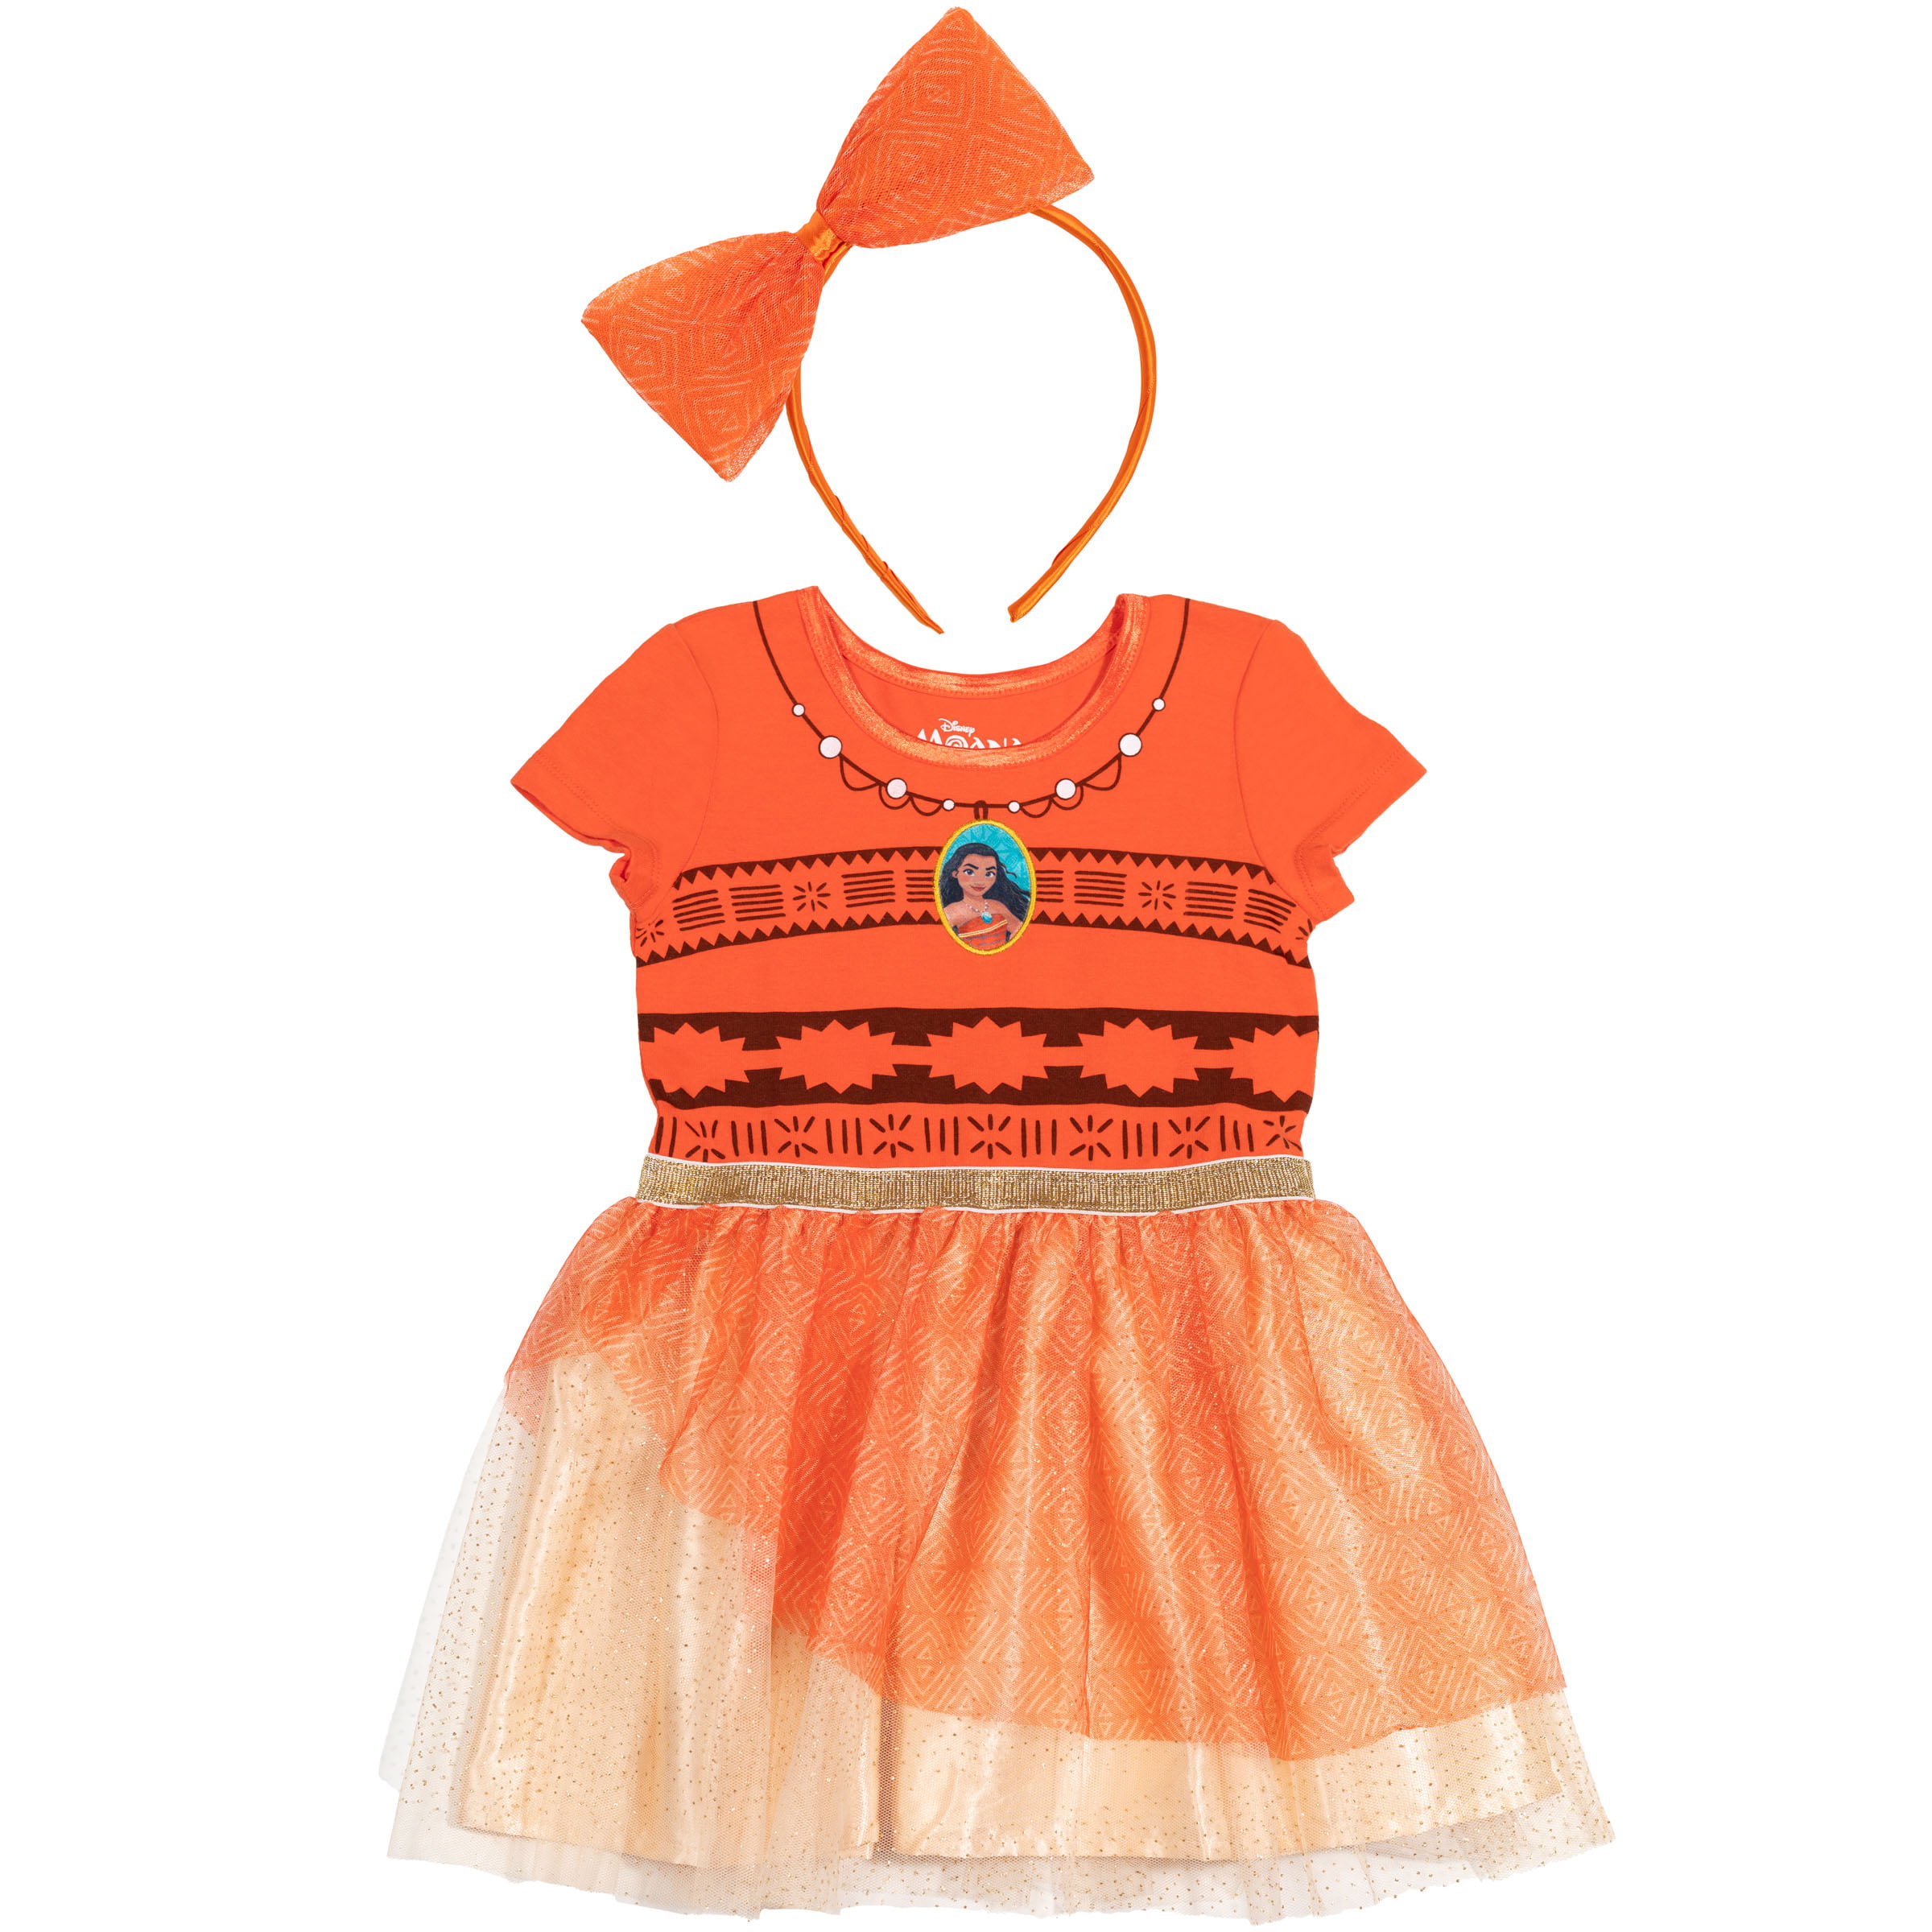 Child Moana Princess Costume Girls Kids Fancy Dress Crop Top and Skirt Outfit 